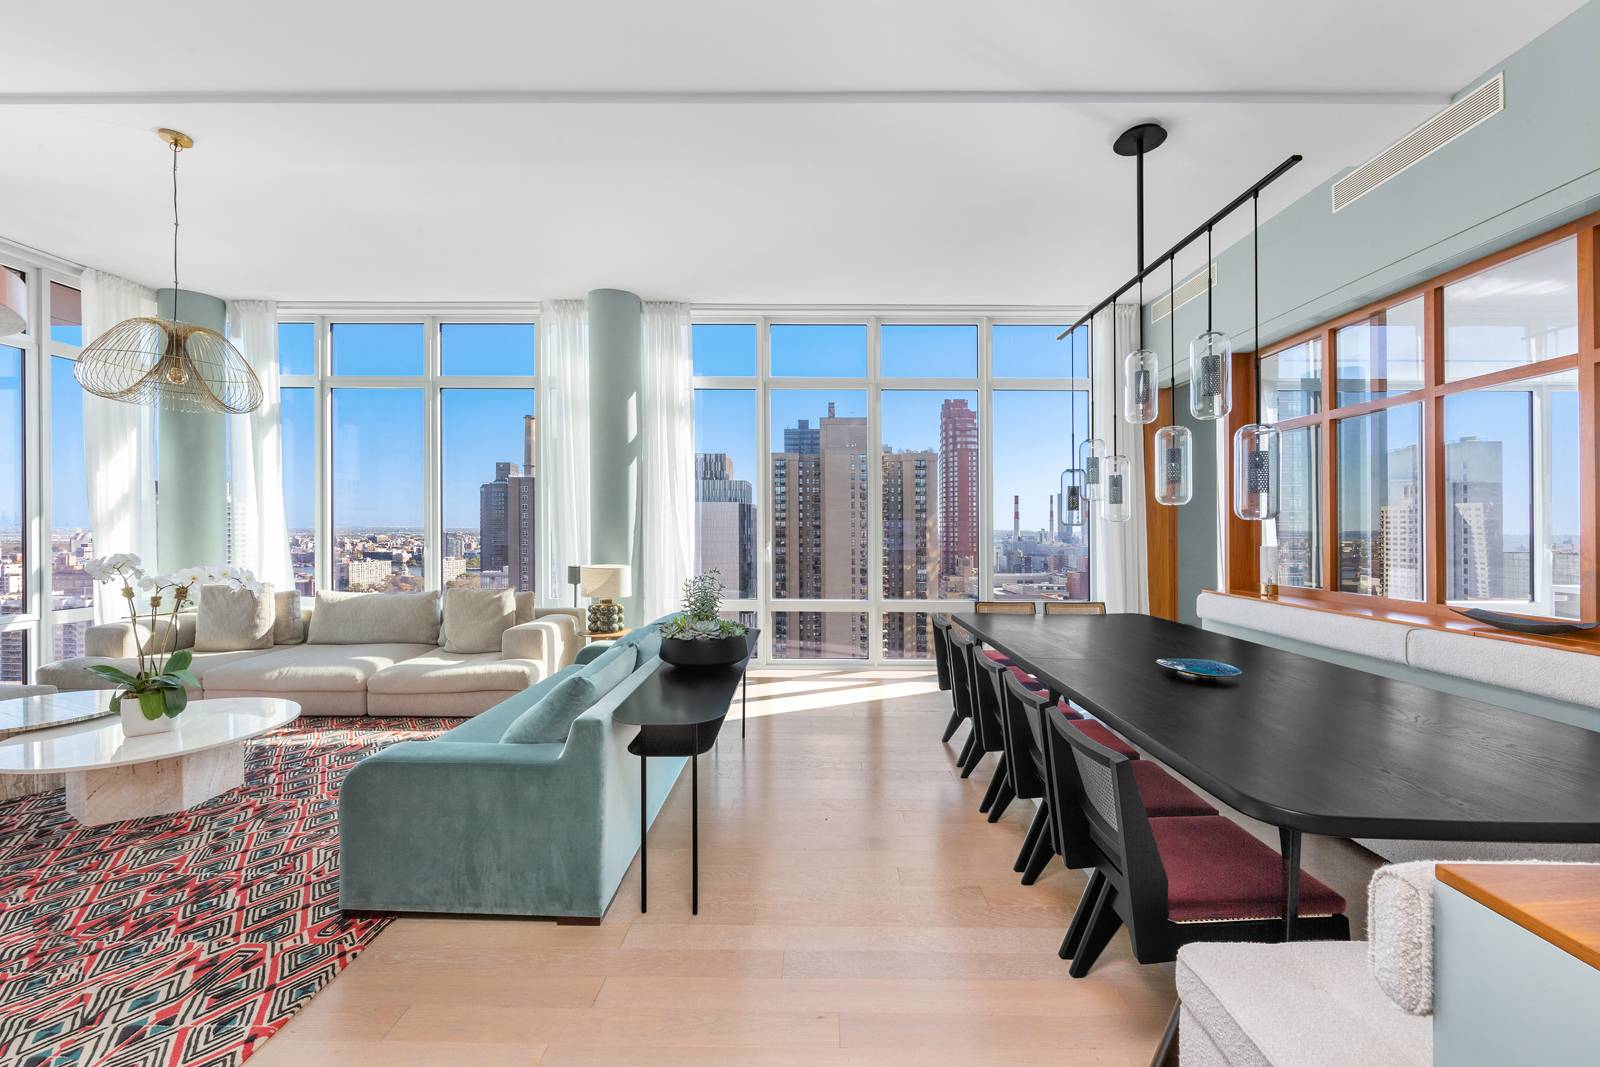 Endless City Views in this Full Floor Masterpiece An impeccable full floor sky palace with custom upgrades and designer furniture and finishes, this stunning 4 bedroom, 4 bathroom condo combines ...